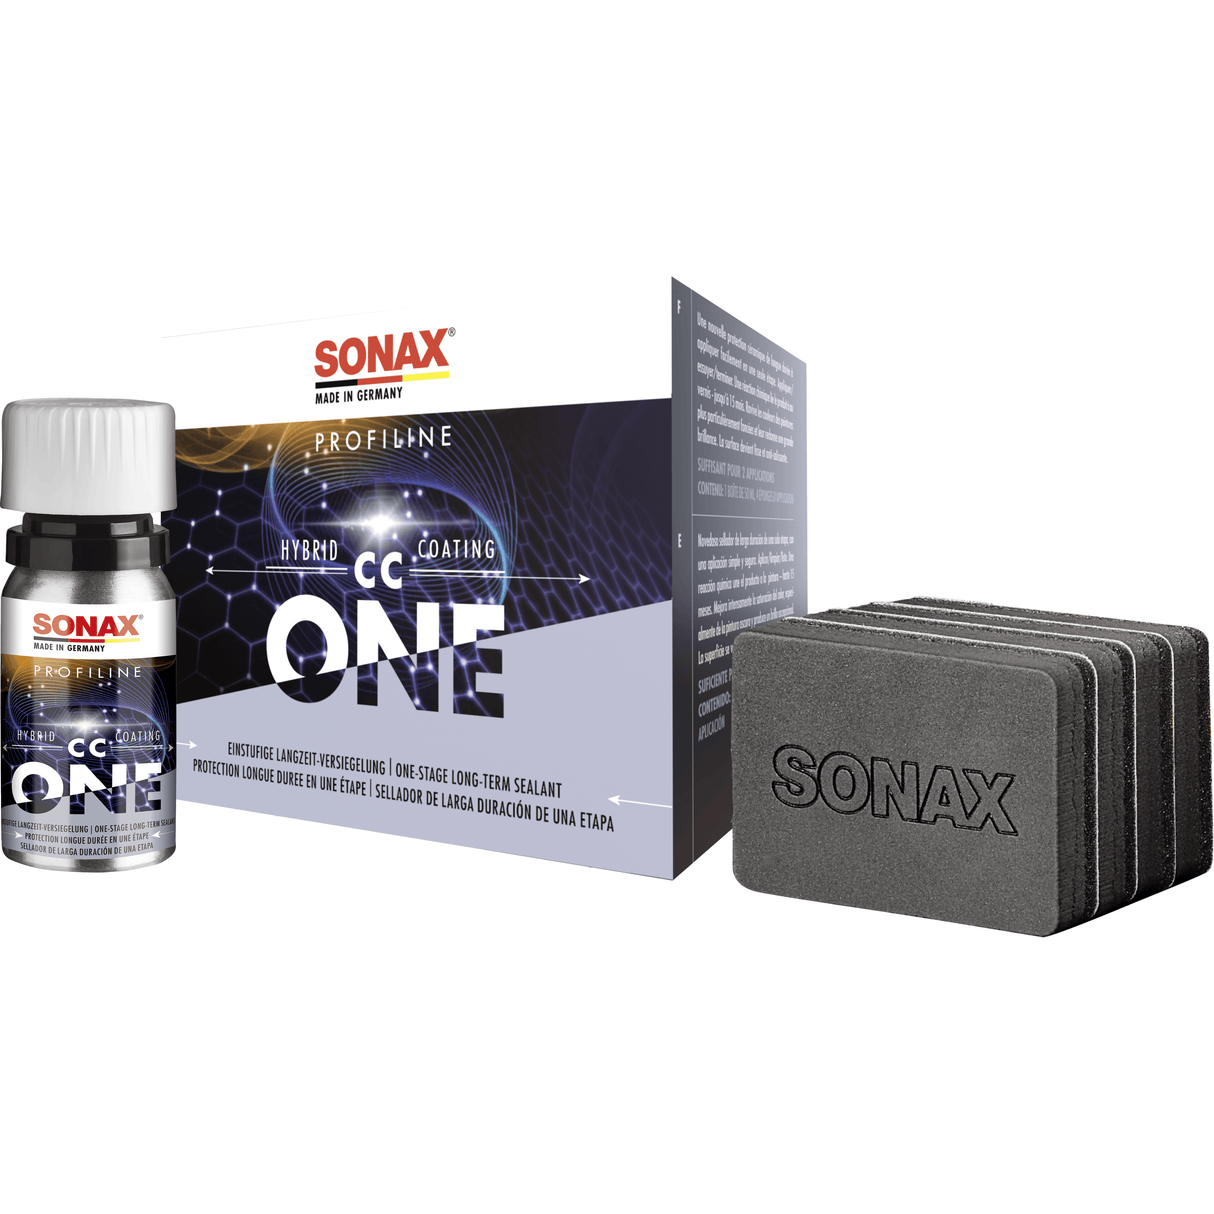 SONAX Profiline HybridCoating CC One - Xpert Cleaning